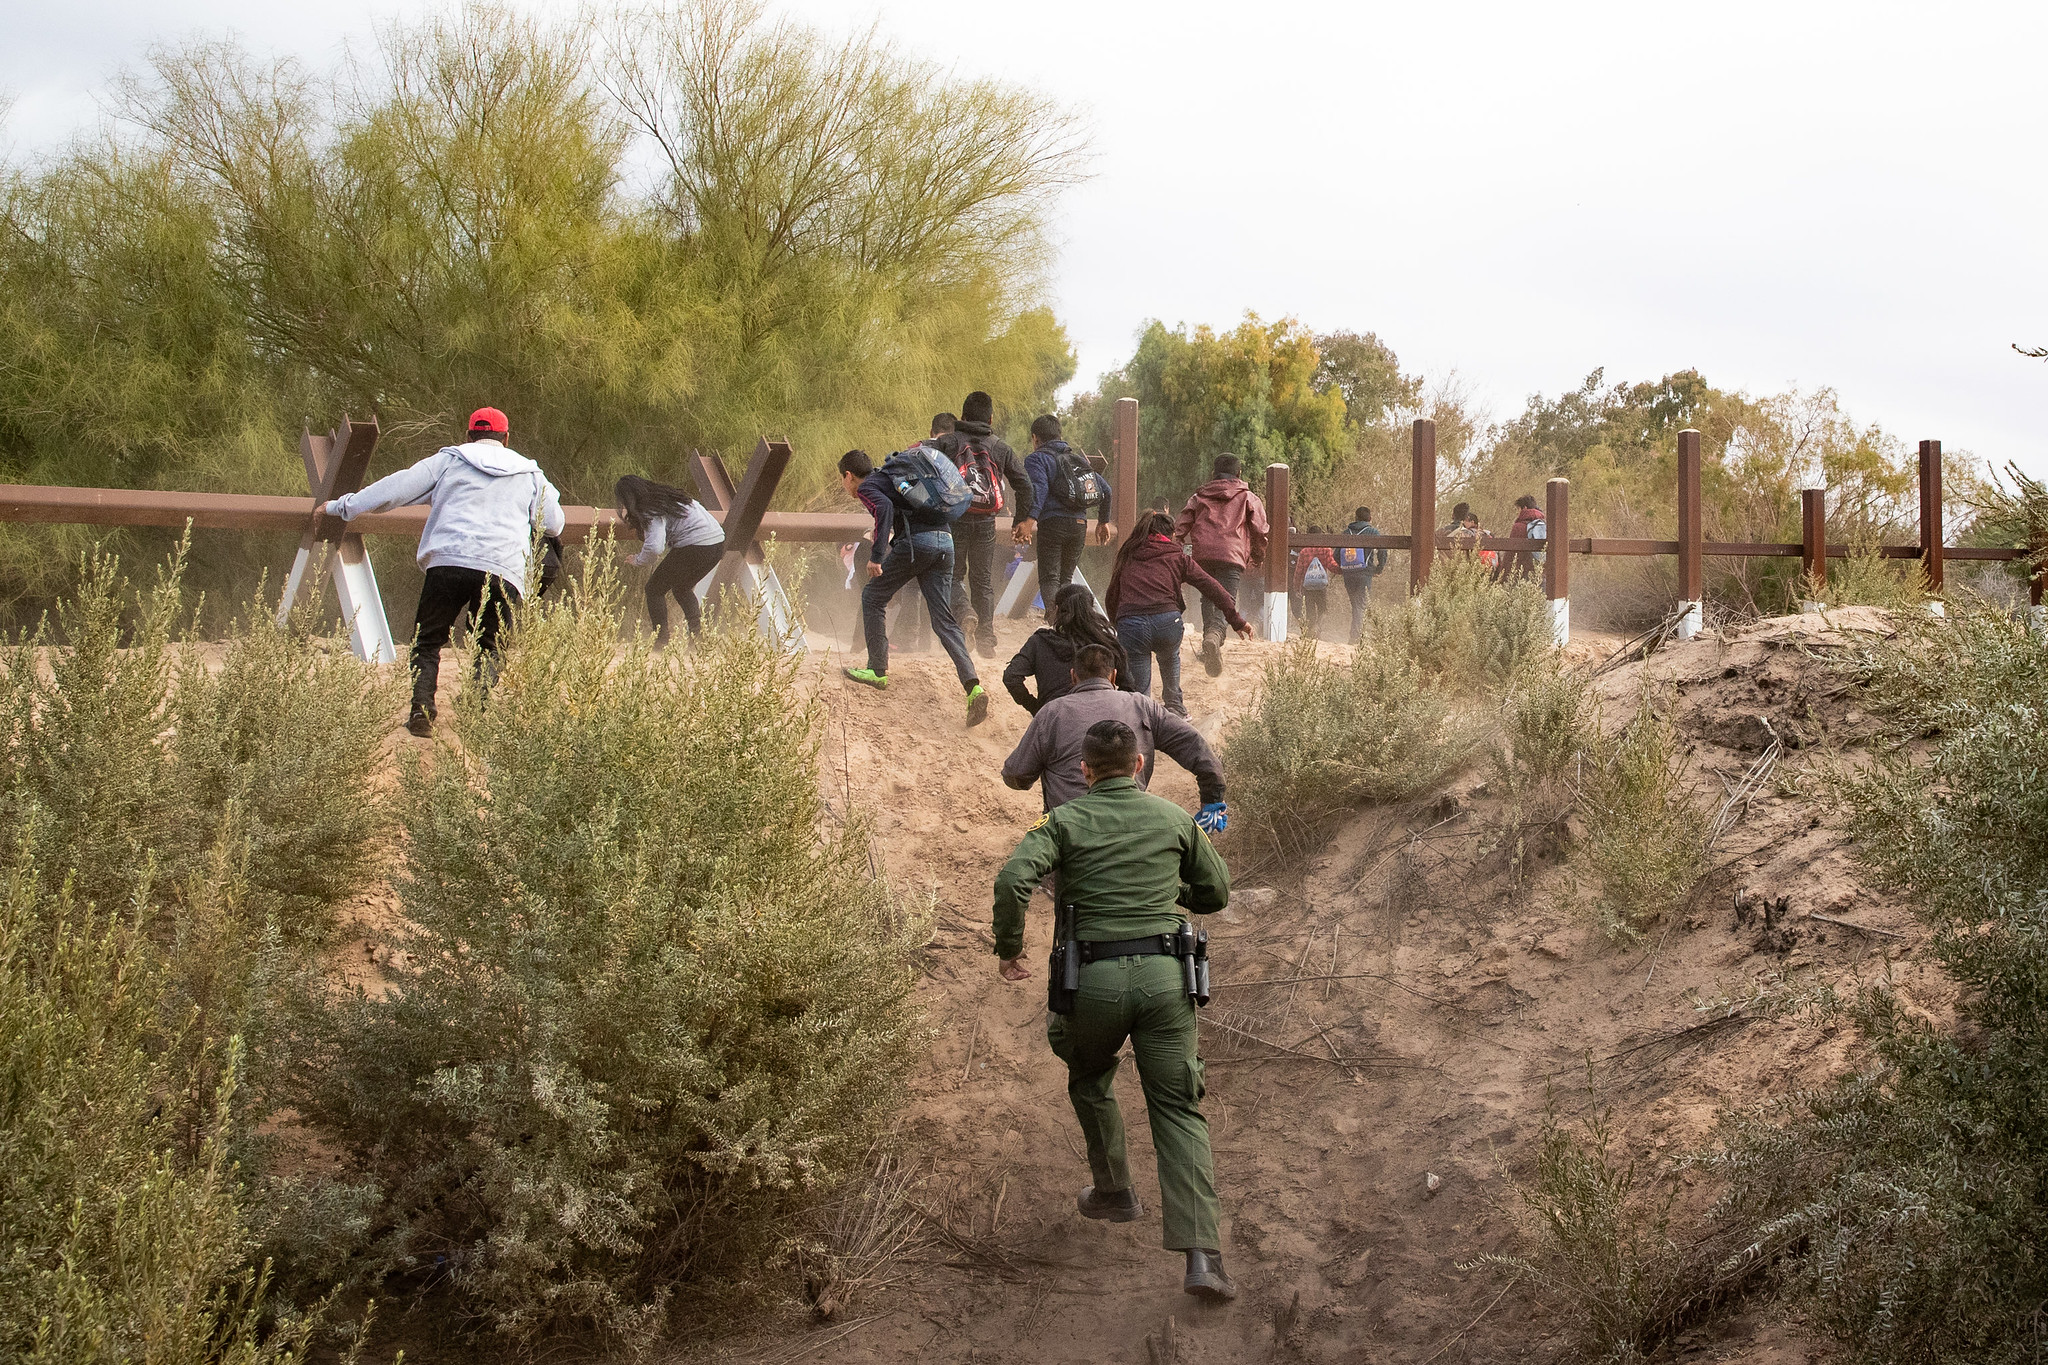 The Border Crisis Is The Definition Of A Foreign ‘Invasion’